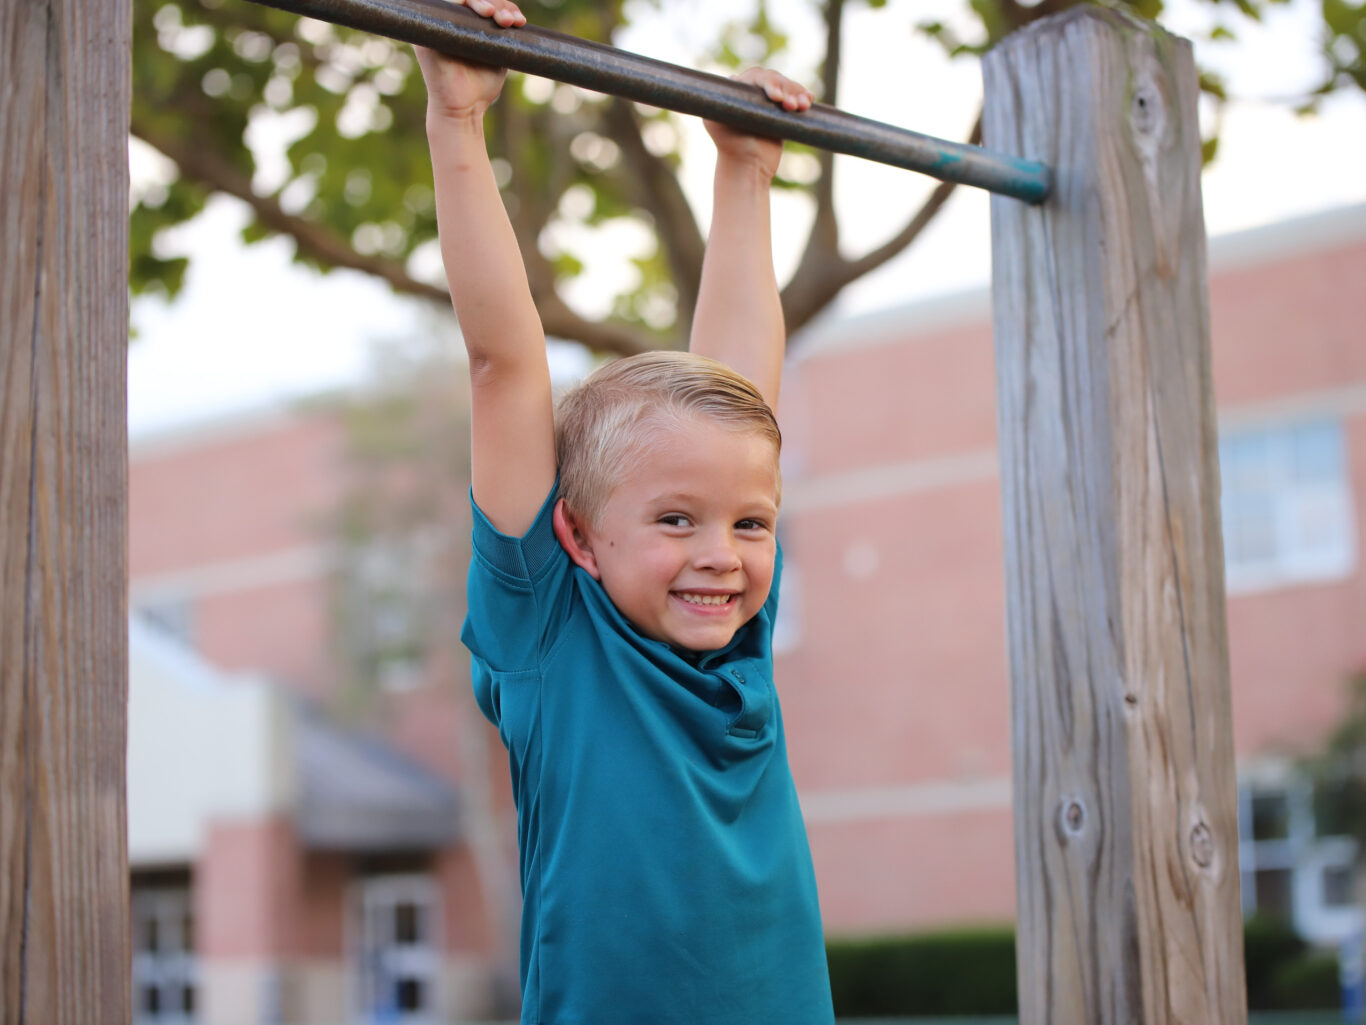 A young boy demonstrating leadership by performing pull-ups on a pull-up bar.